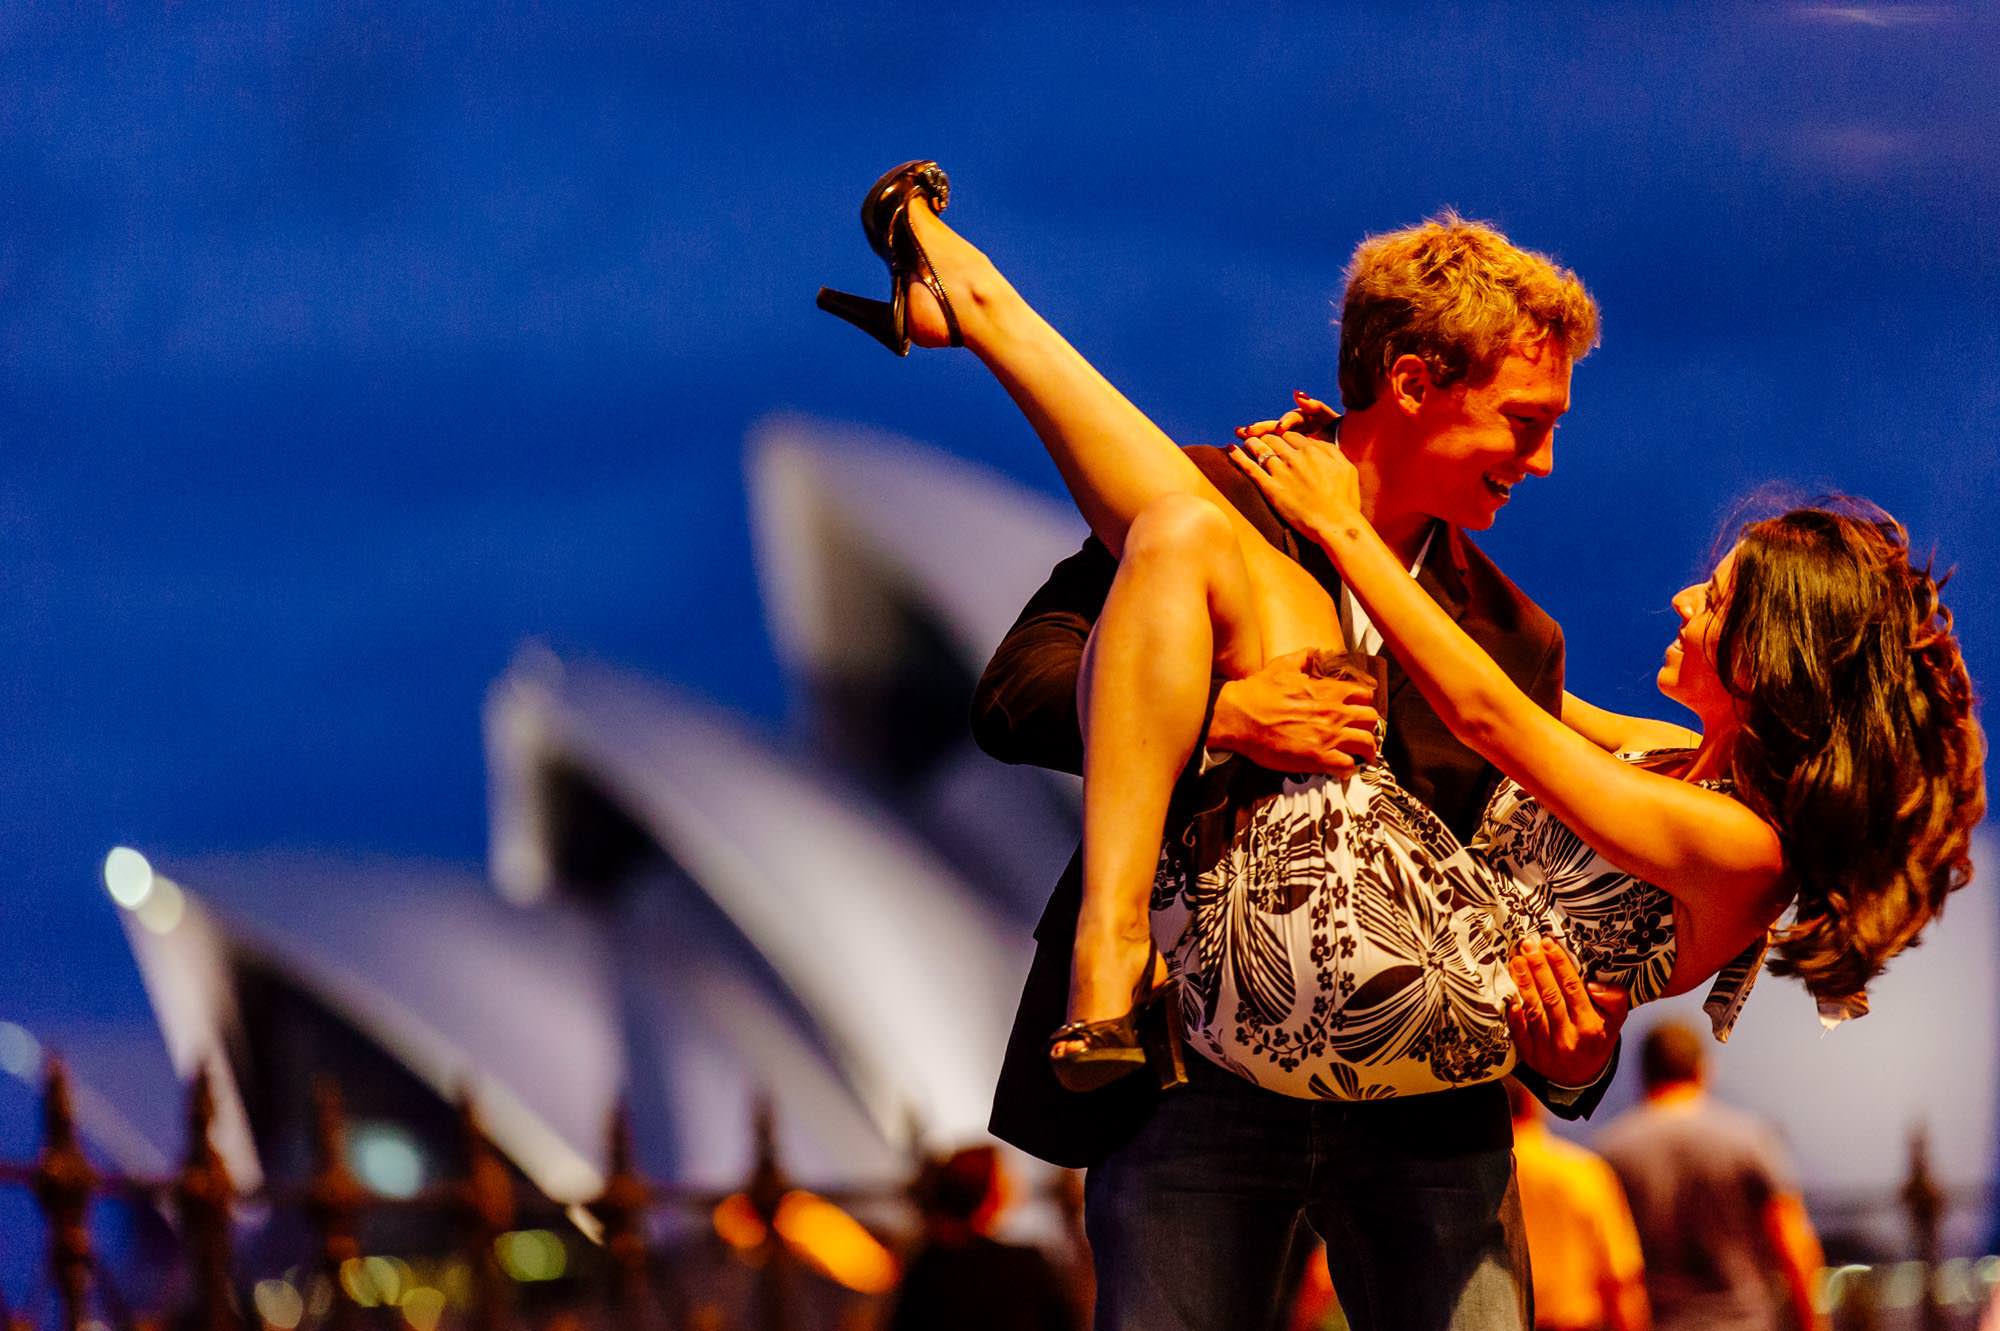 Engagement photos in front of Opera house